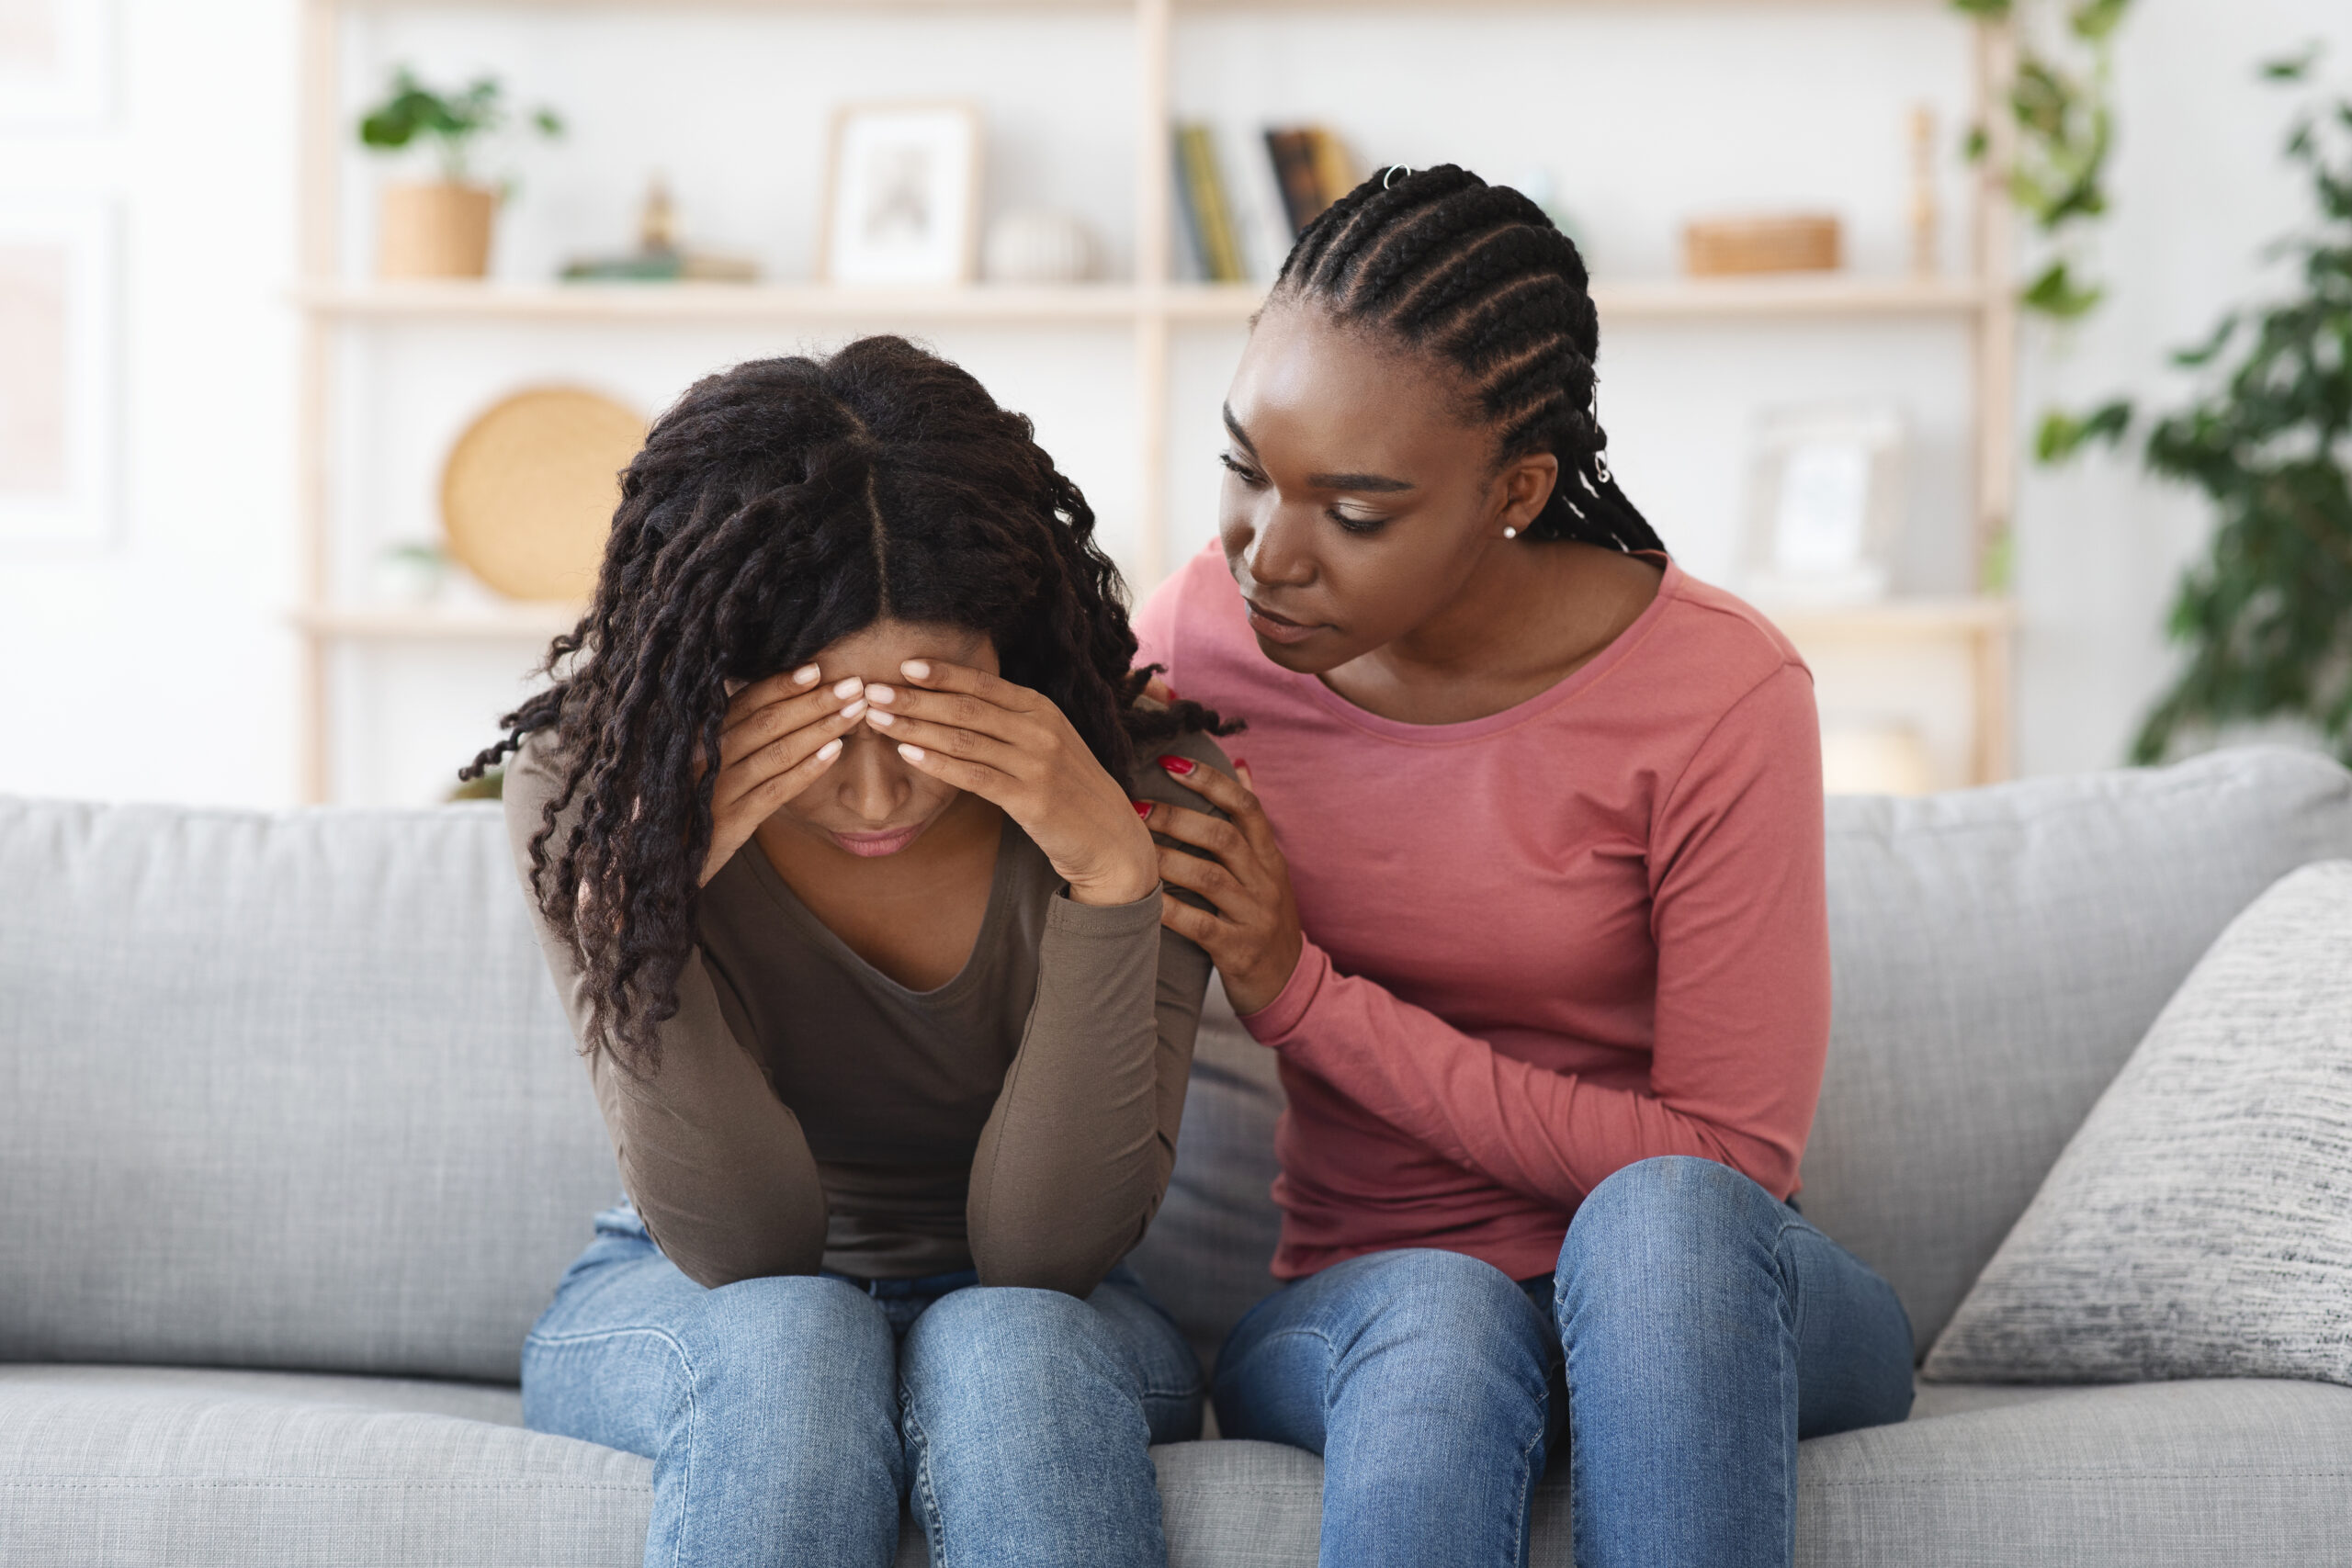 Recognizing Signs of Addiction, What to Do If Your Friend Shows Signs of Addiction